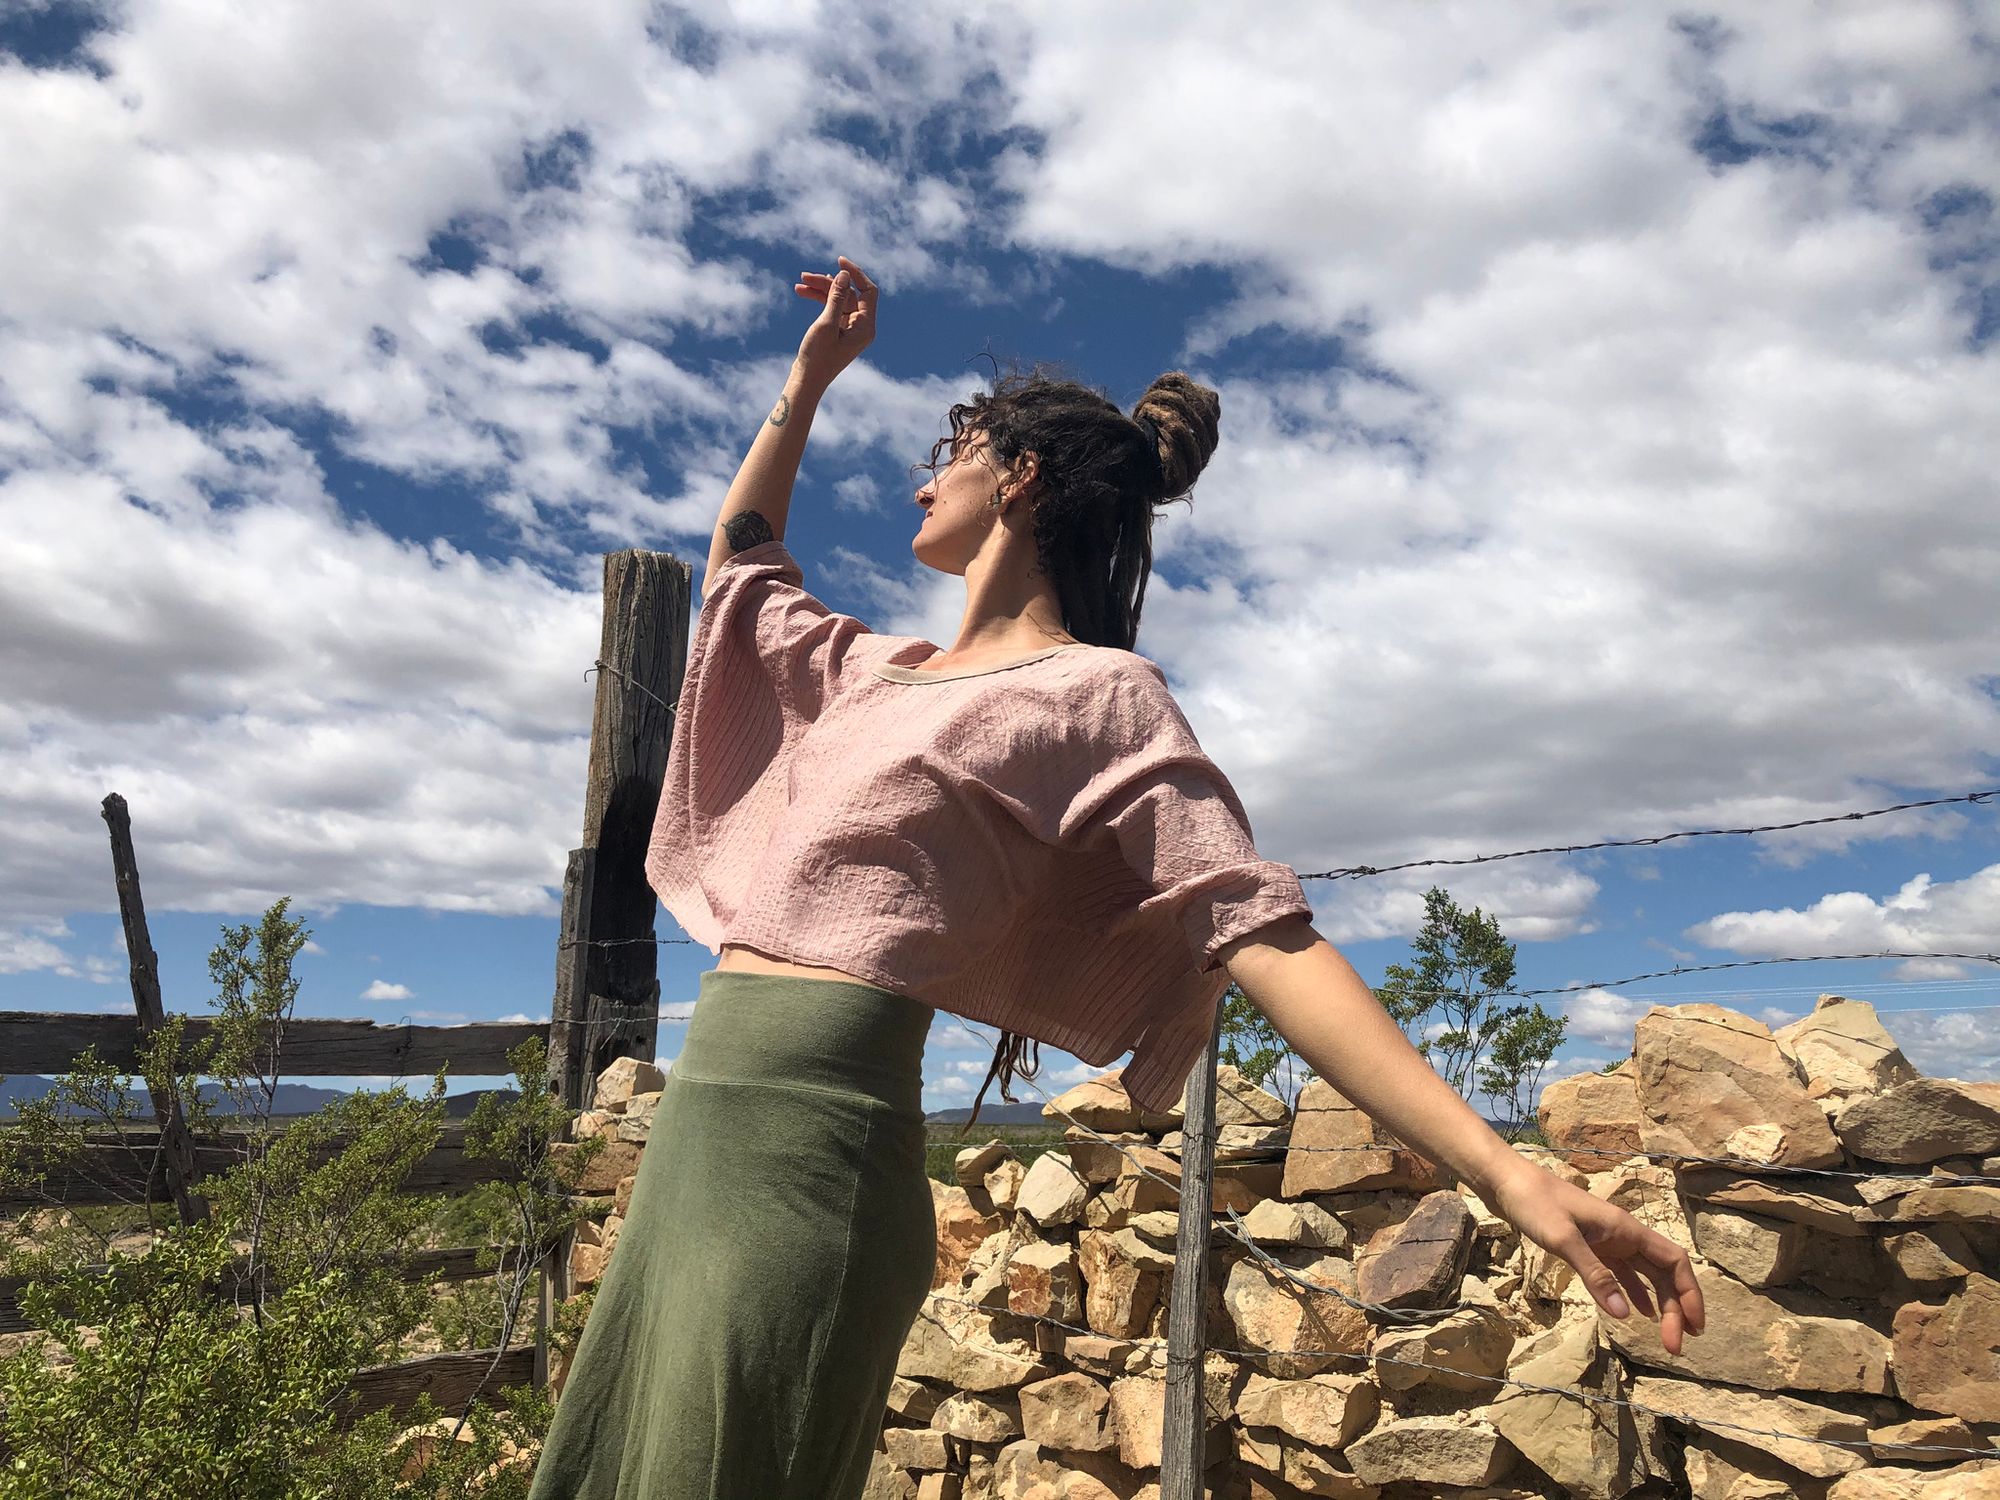 woman wearing Pink striped hand sewn silk shirt and green skirt outside with a blue cloudy sky